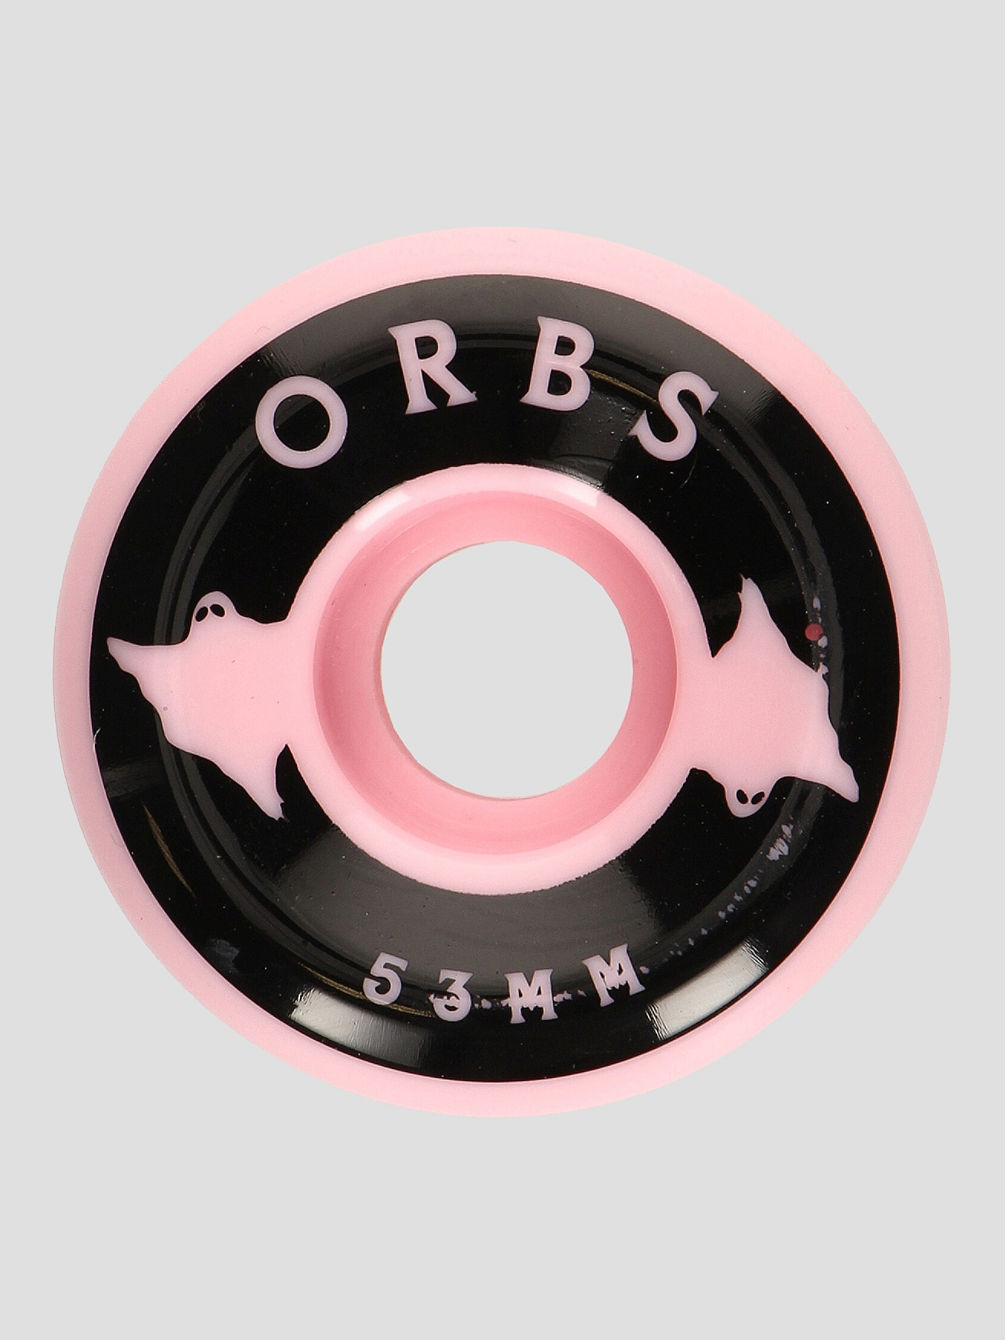 Orbs Specters - Conical - 99A 53mm Hjul